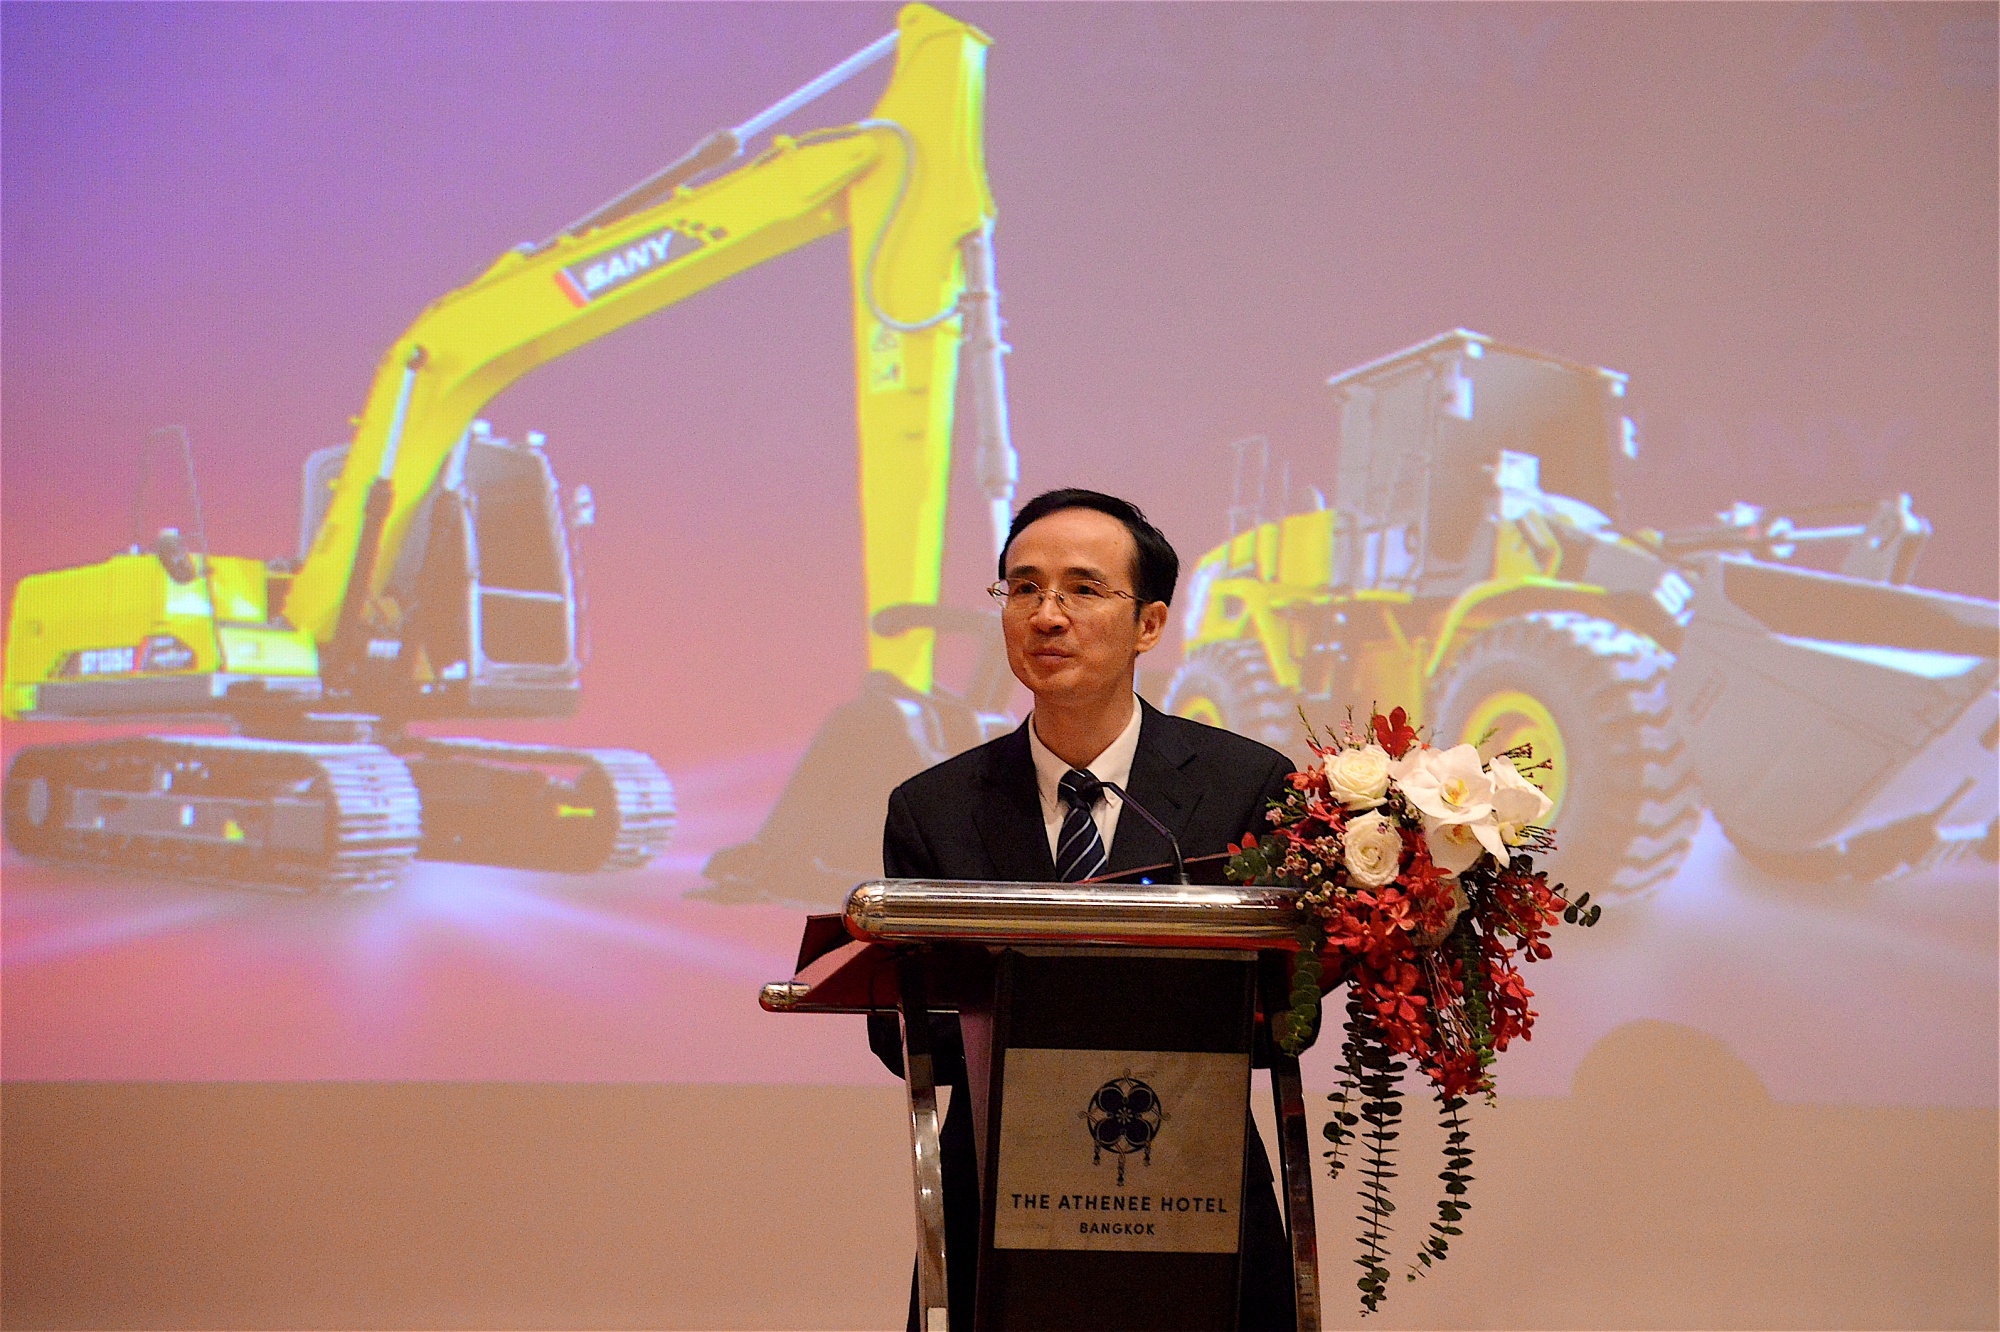 Wang Zheng Vice President of Sany Group and CEO of Sany Heavy Machinery